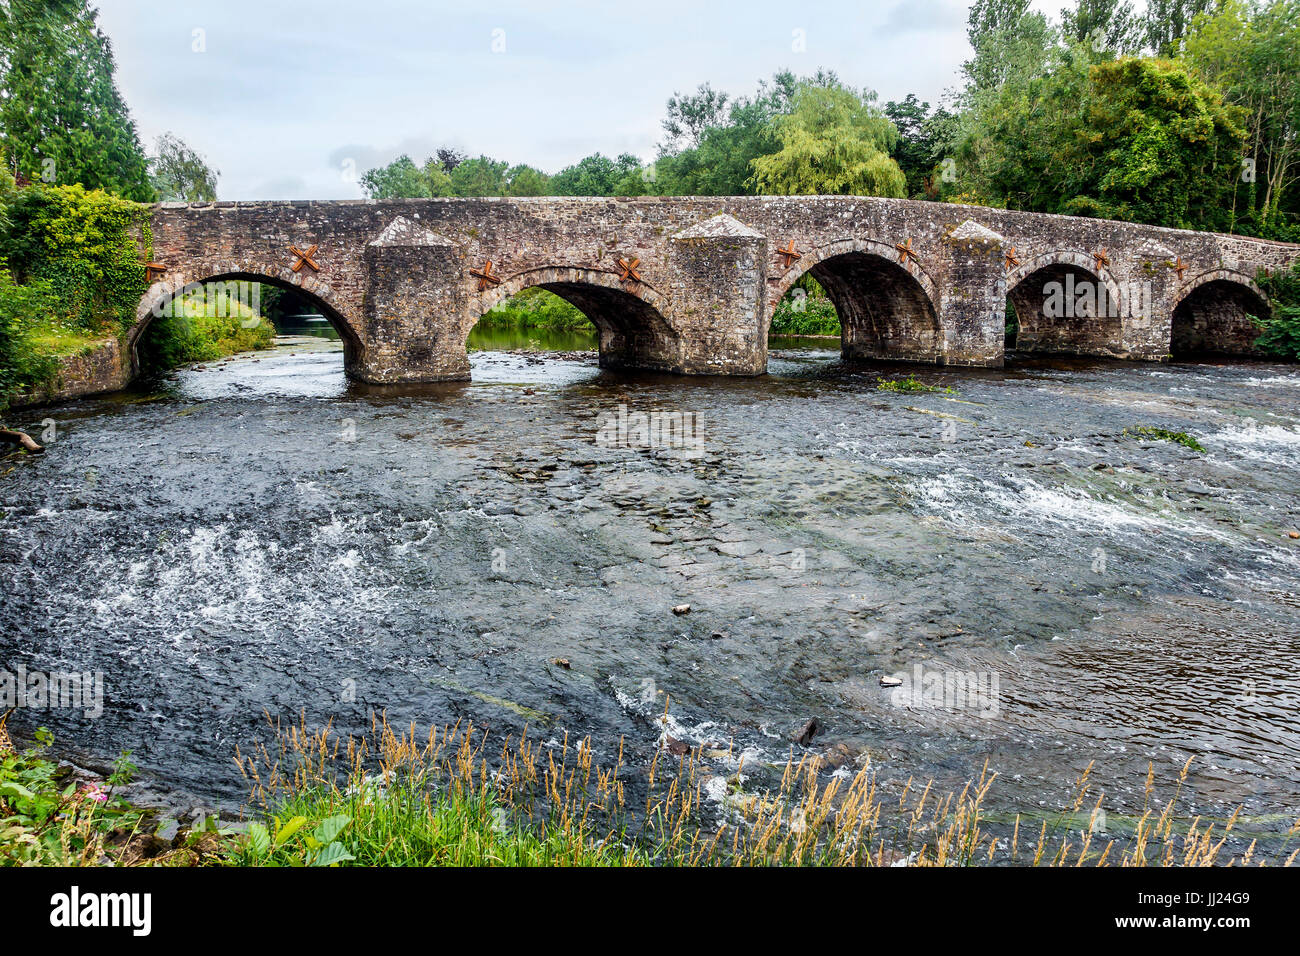 Medieval Bridge crossing the River Exe at Bickleigh Devon. A five arch stone bridge crossing the river Exe below Tiverton, built in 1809 and listed Gr Stock Photo